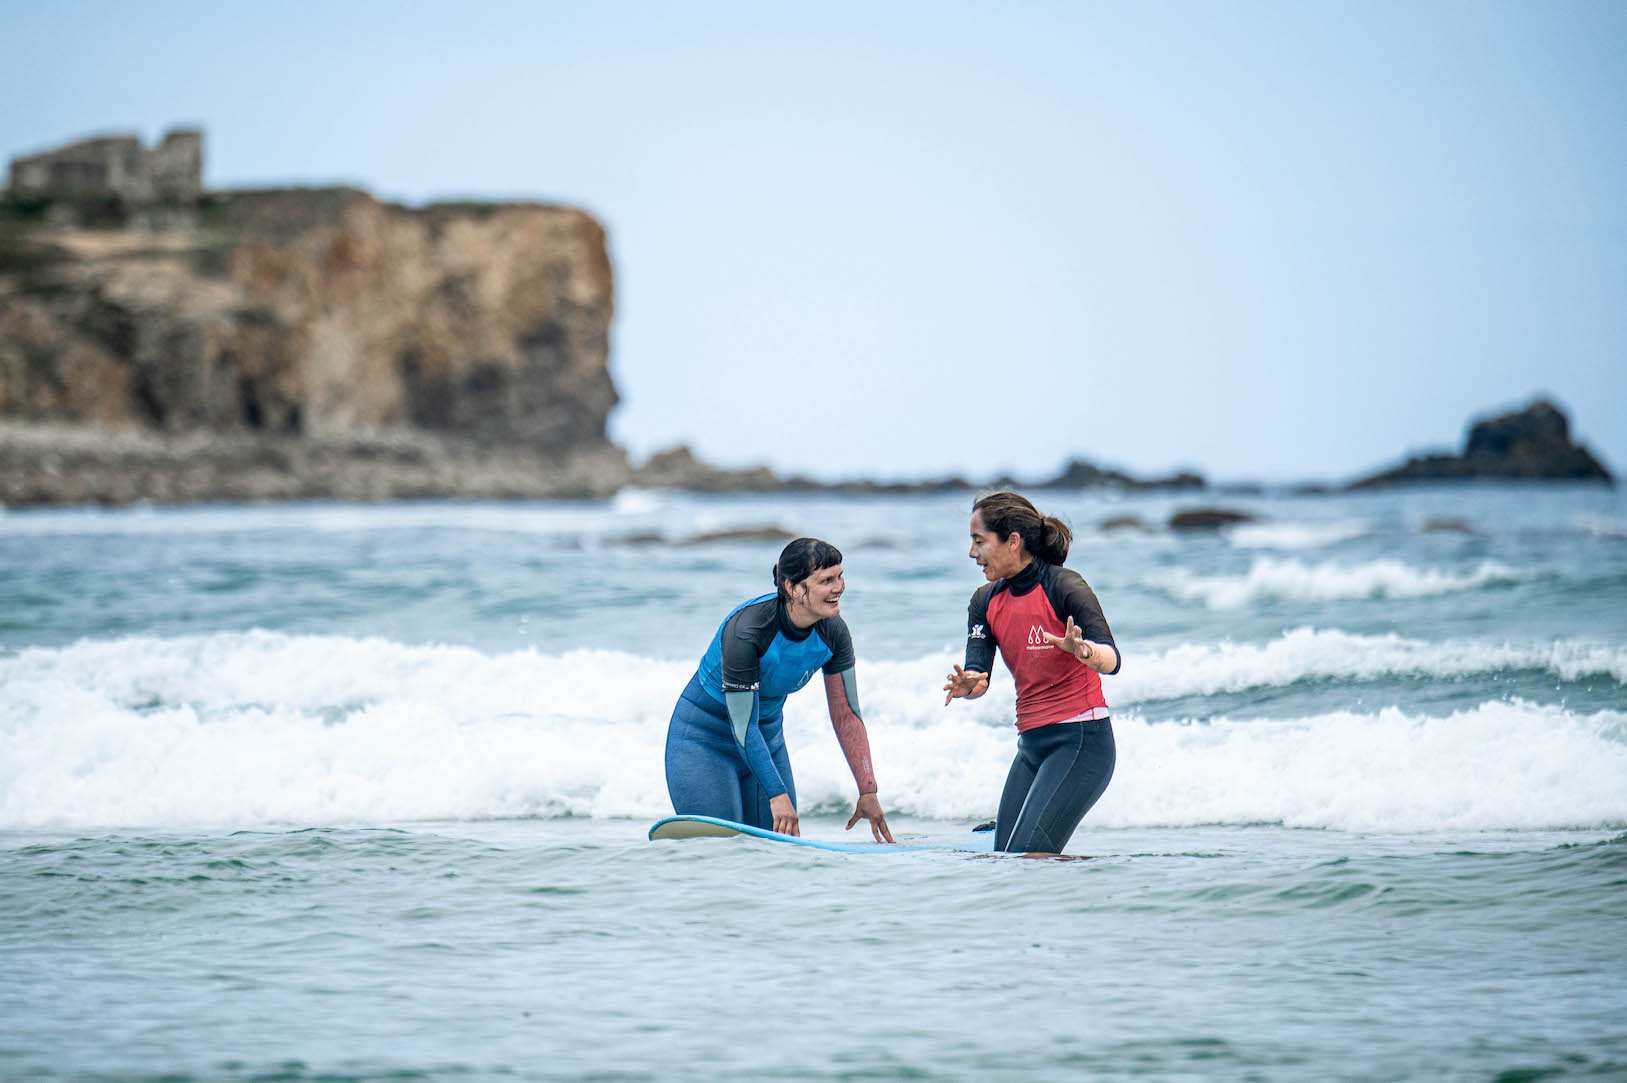 Surfcoach explaining surf technique to a student, both are standing in the the water in the ocean.